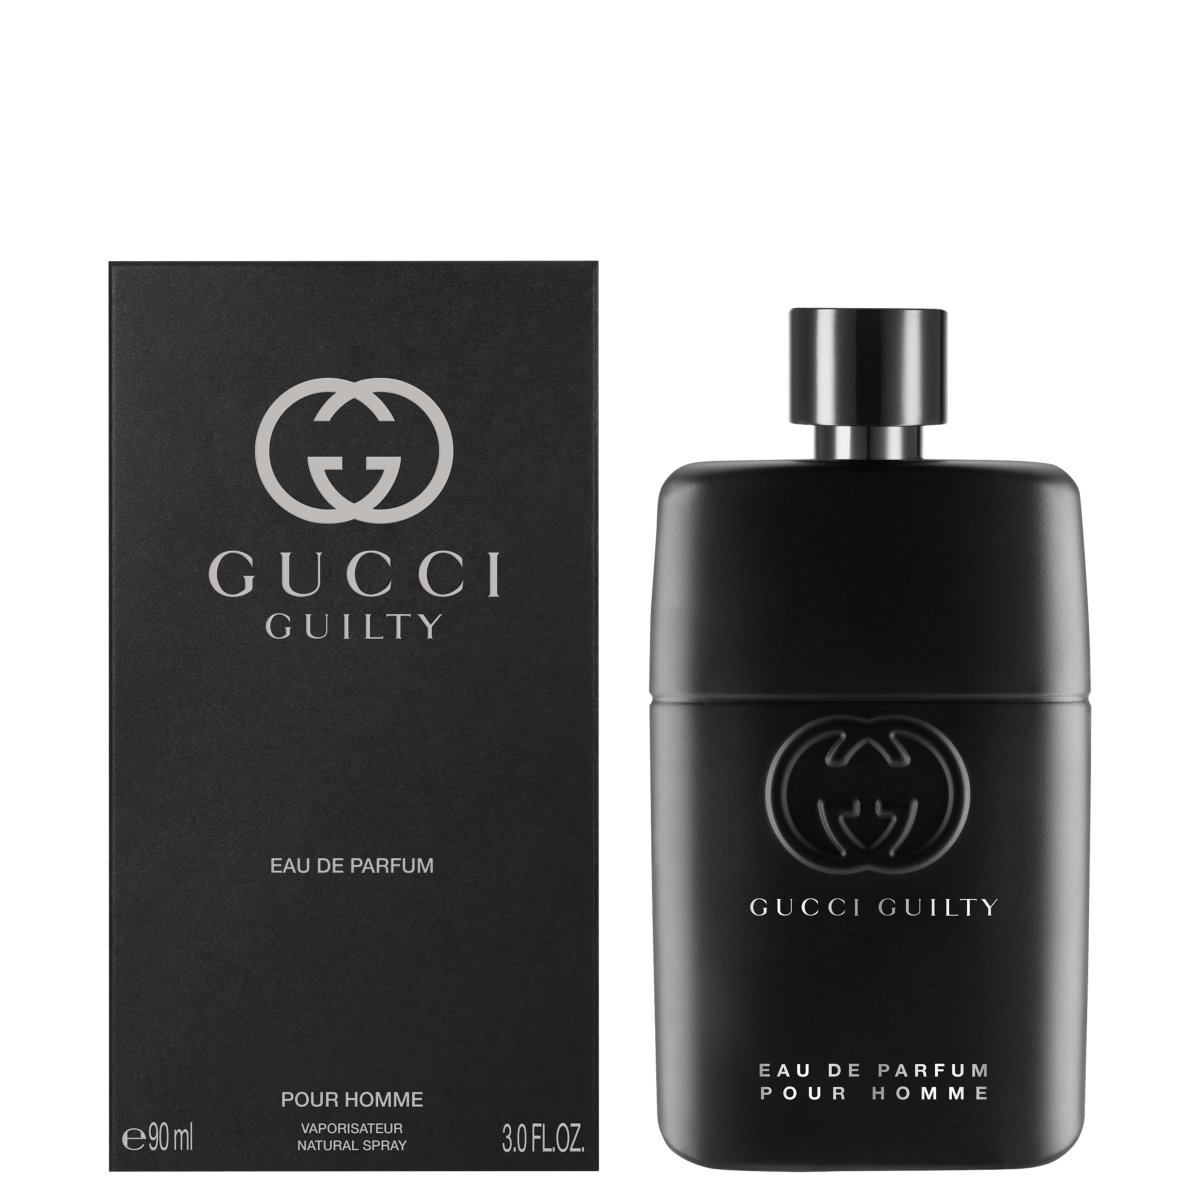 gucci guilty cologne review